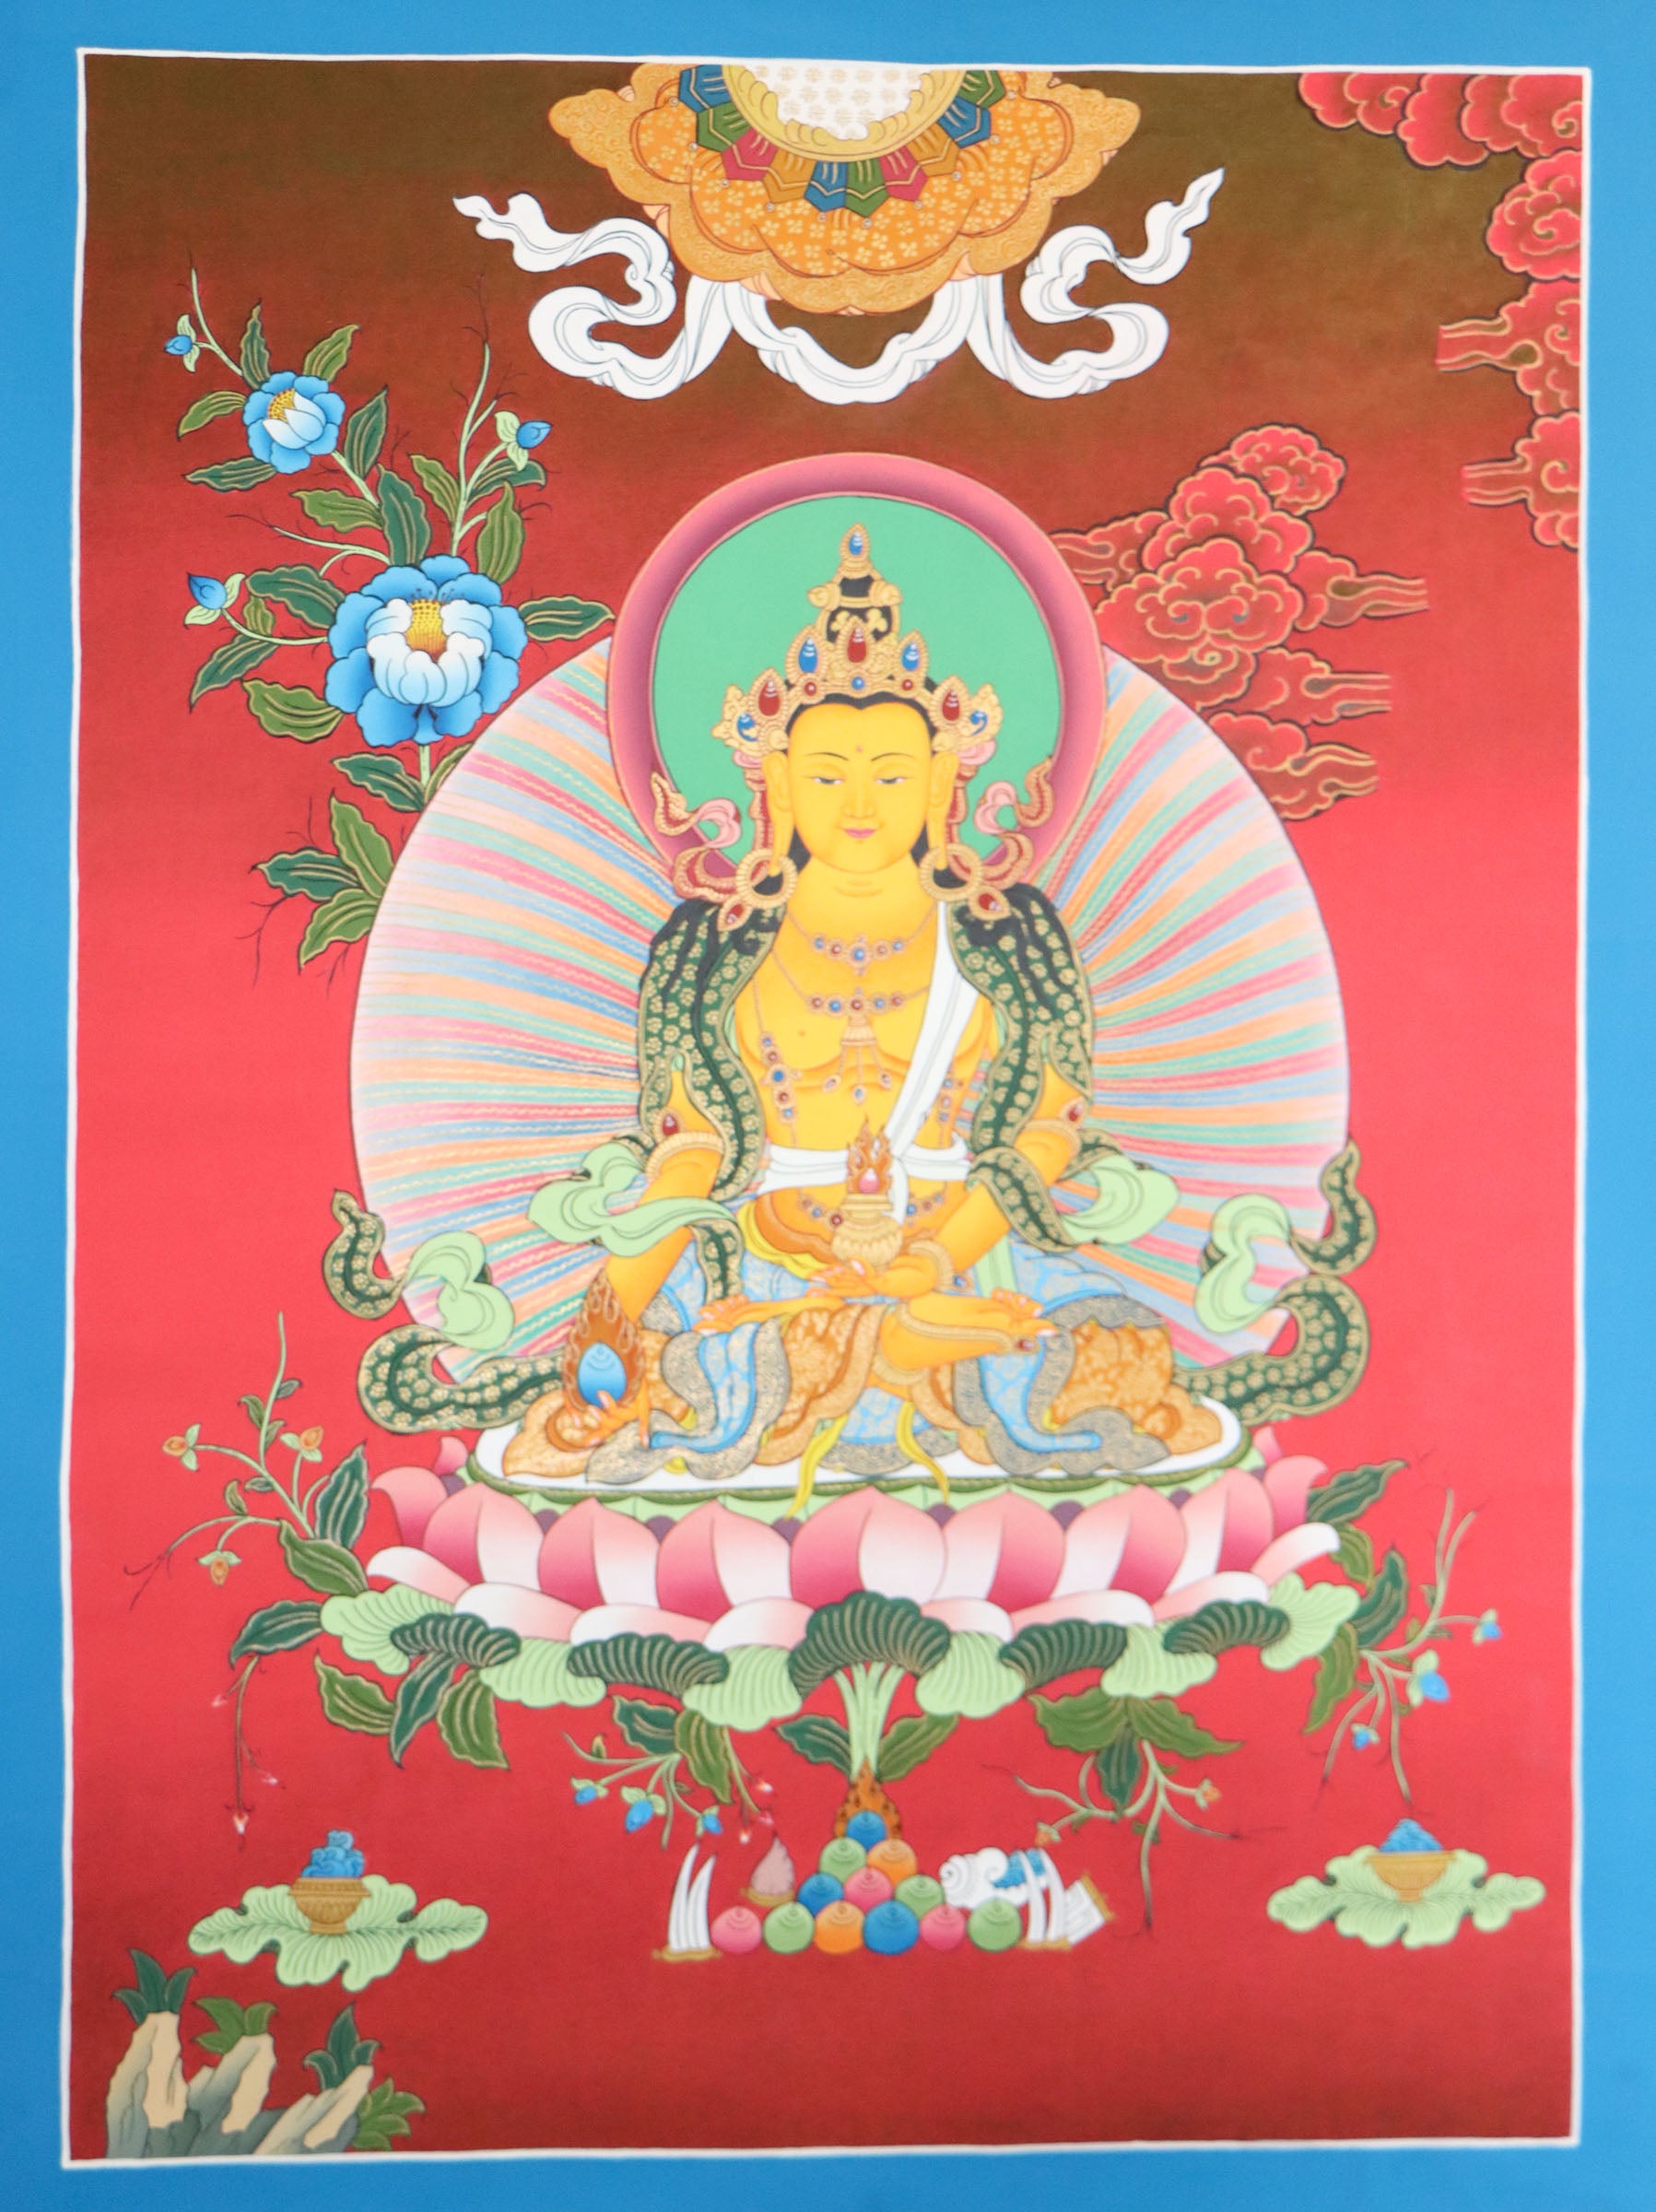 Crown Buddha Thangka is a strong visual aid for meditation and contemplation, enabling people to expand their knowledge of the Buddha's teachings.